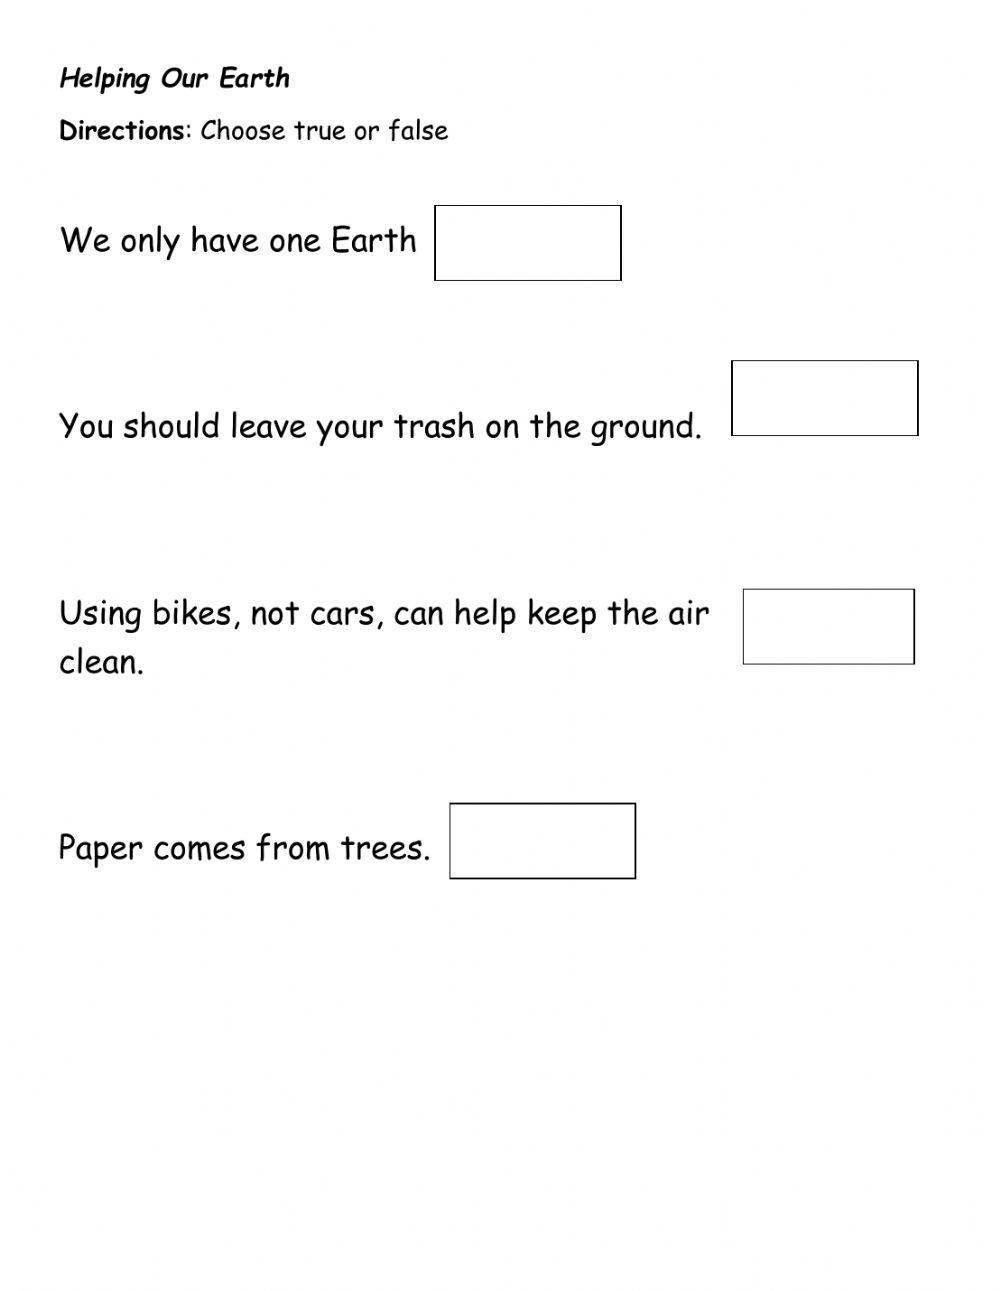 Helping our Earth